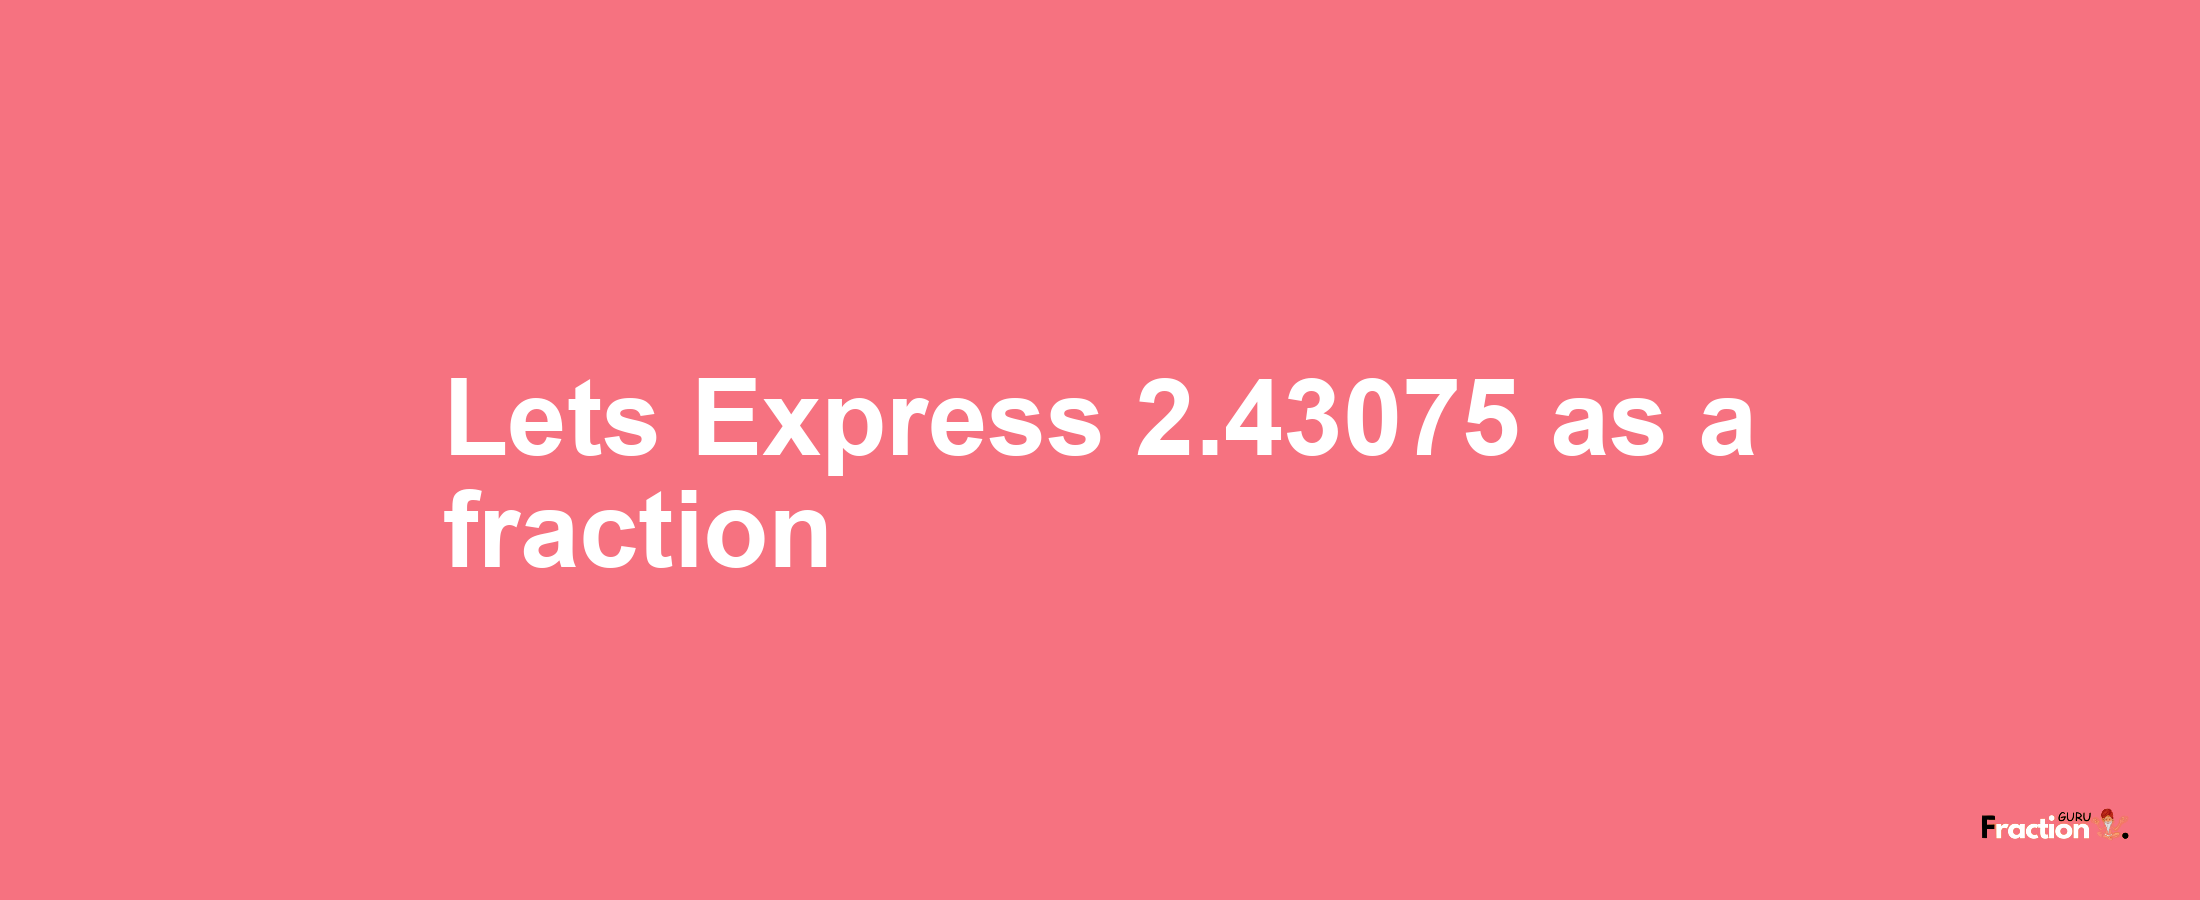 Lets Express 2.43075 as afraction